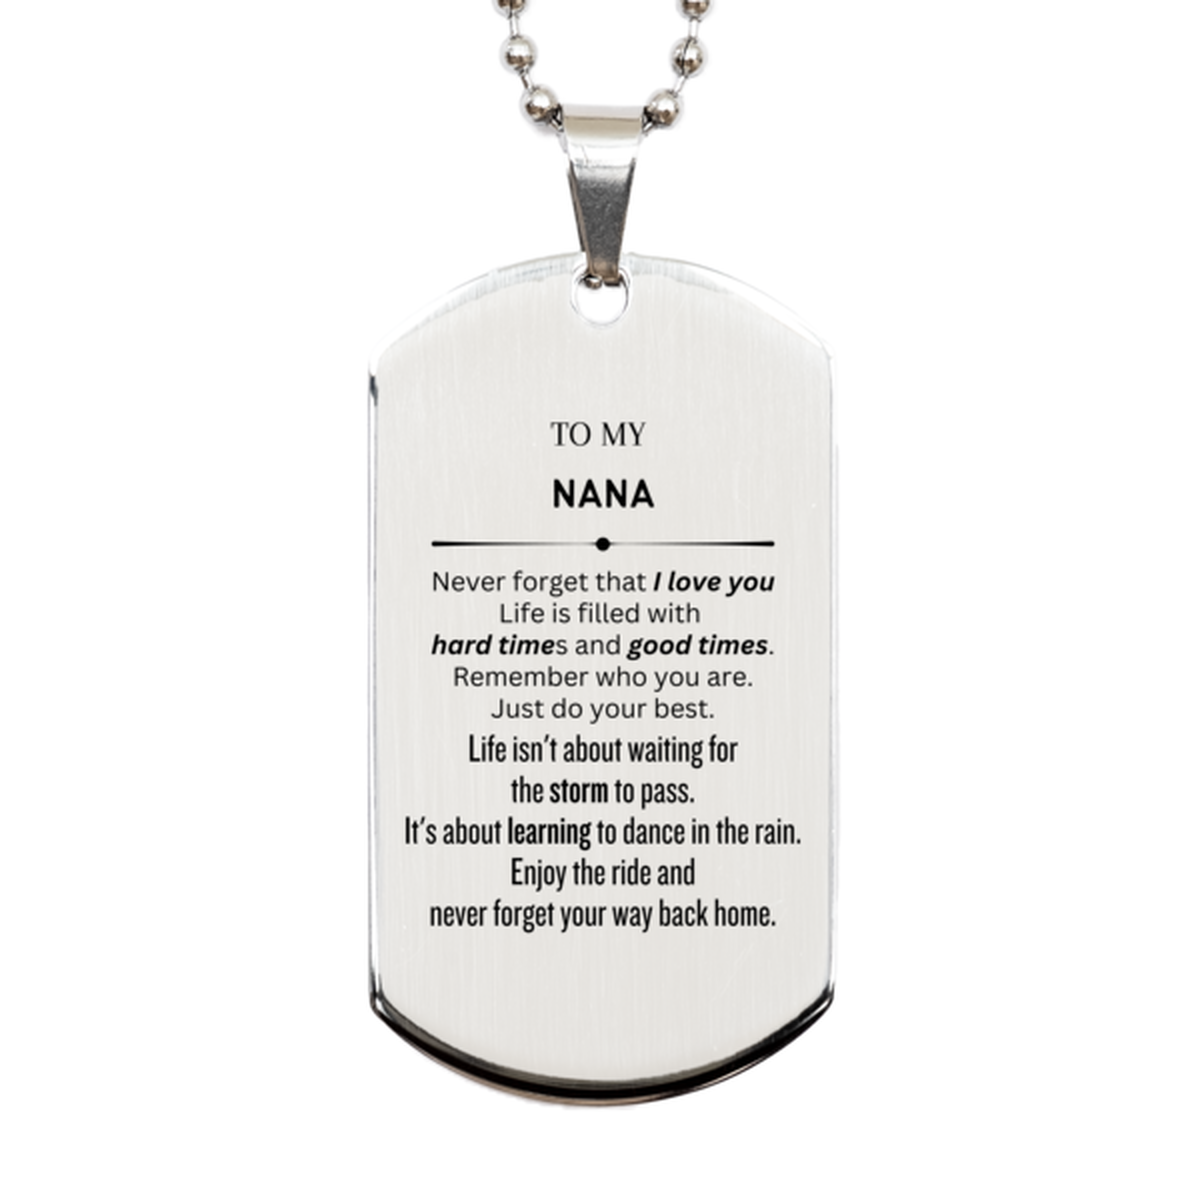 Christmas Nana Silver Dog Tag Gifts, To My Nana Birthday Thank You Gifts For Nana, Graduation Unique Gifts For Nana To My Nana Never forget that I love you life is filled with hard times and good times. Remember who you are. Just do your best